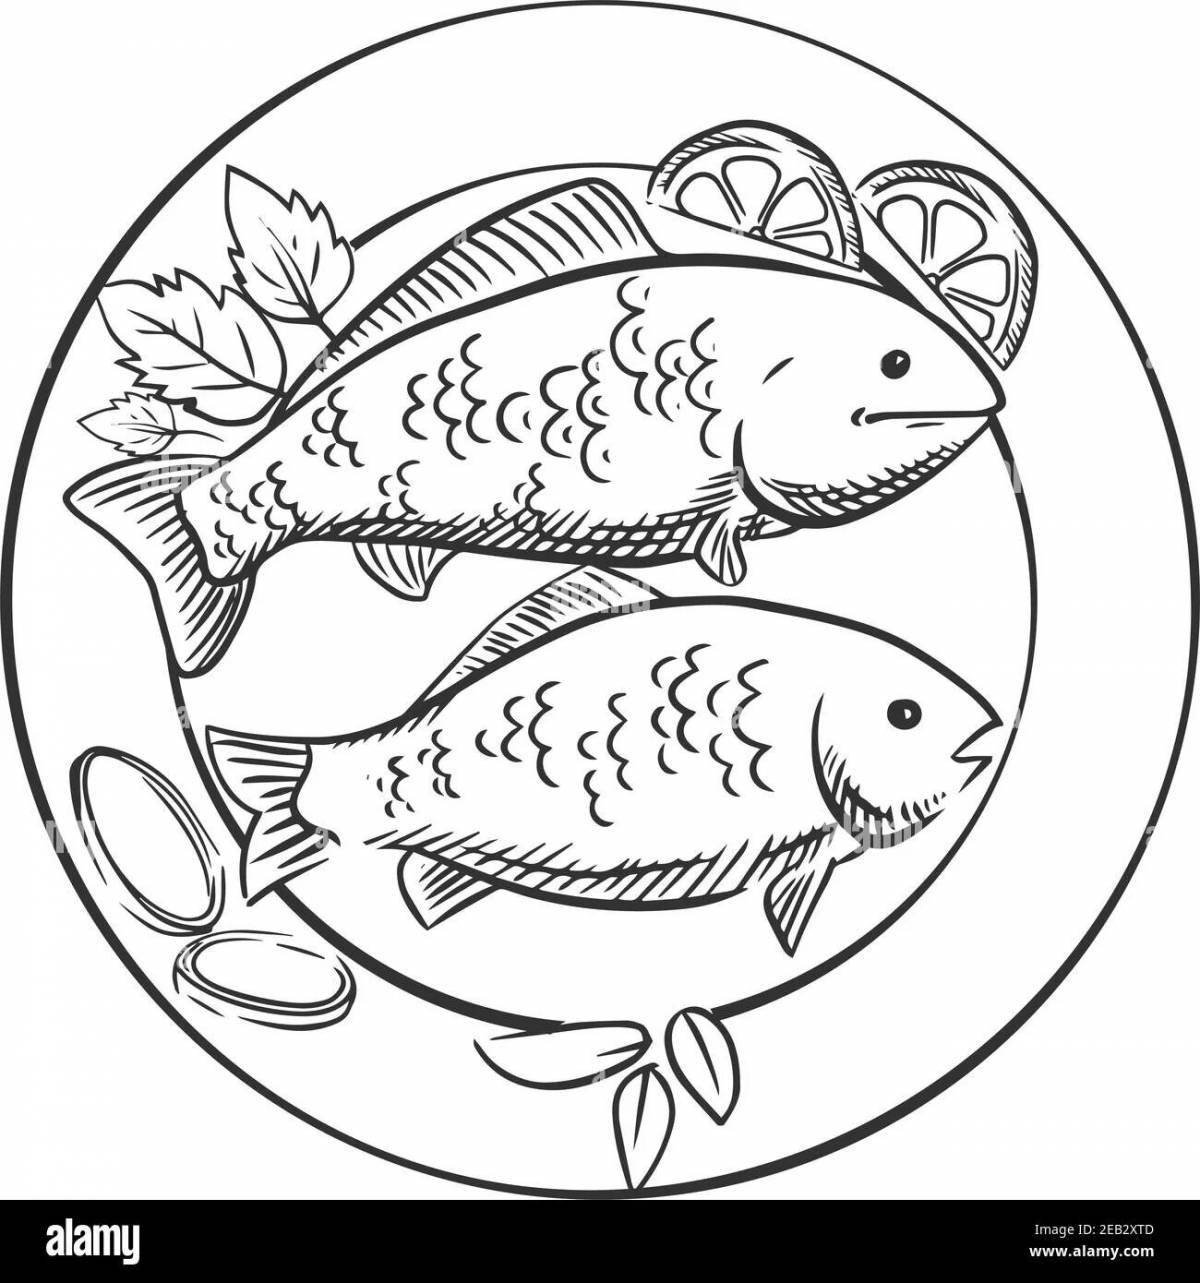 Coloring fish products for children